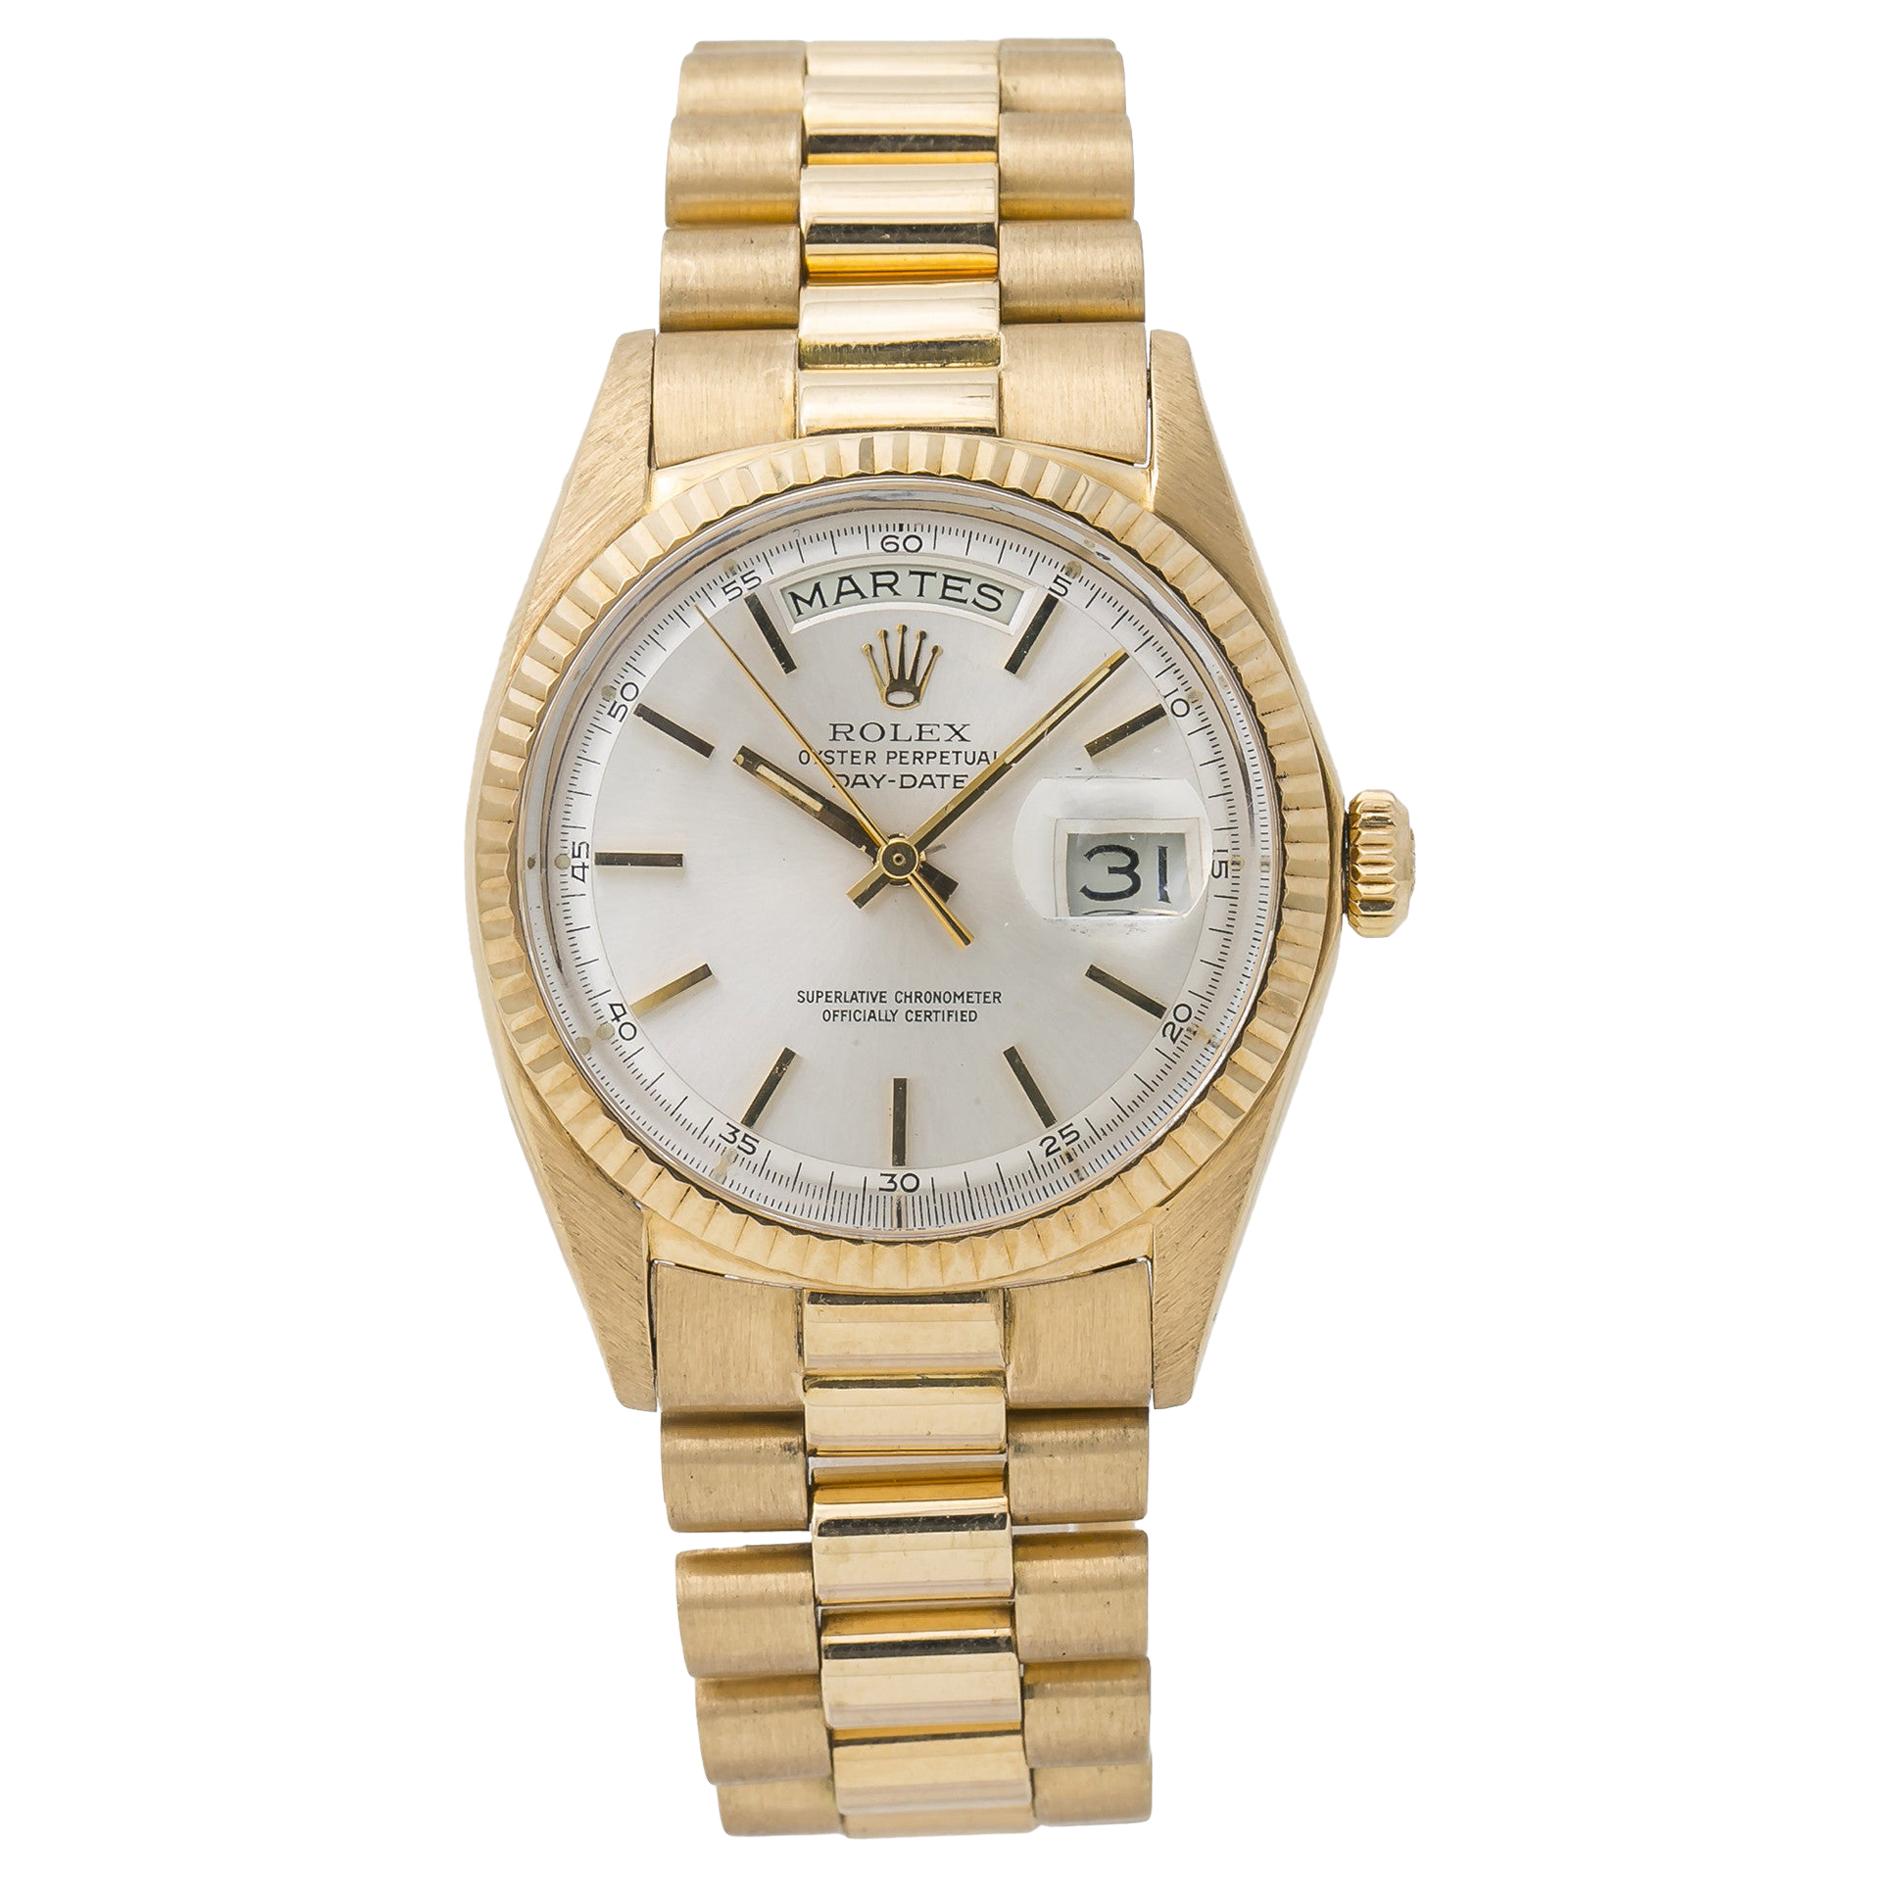 Rolex Day-Date President 1802 Unpolished 18 Karat Yellow Gold Silver Dial Men's